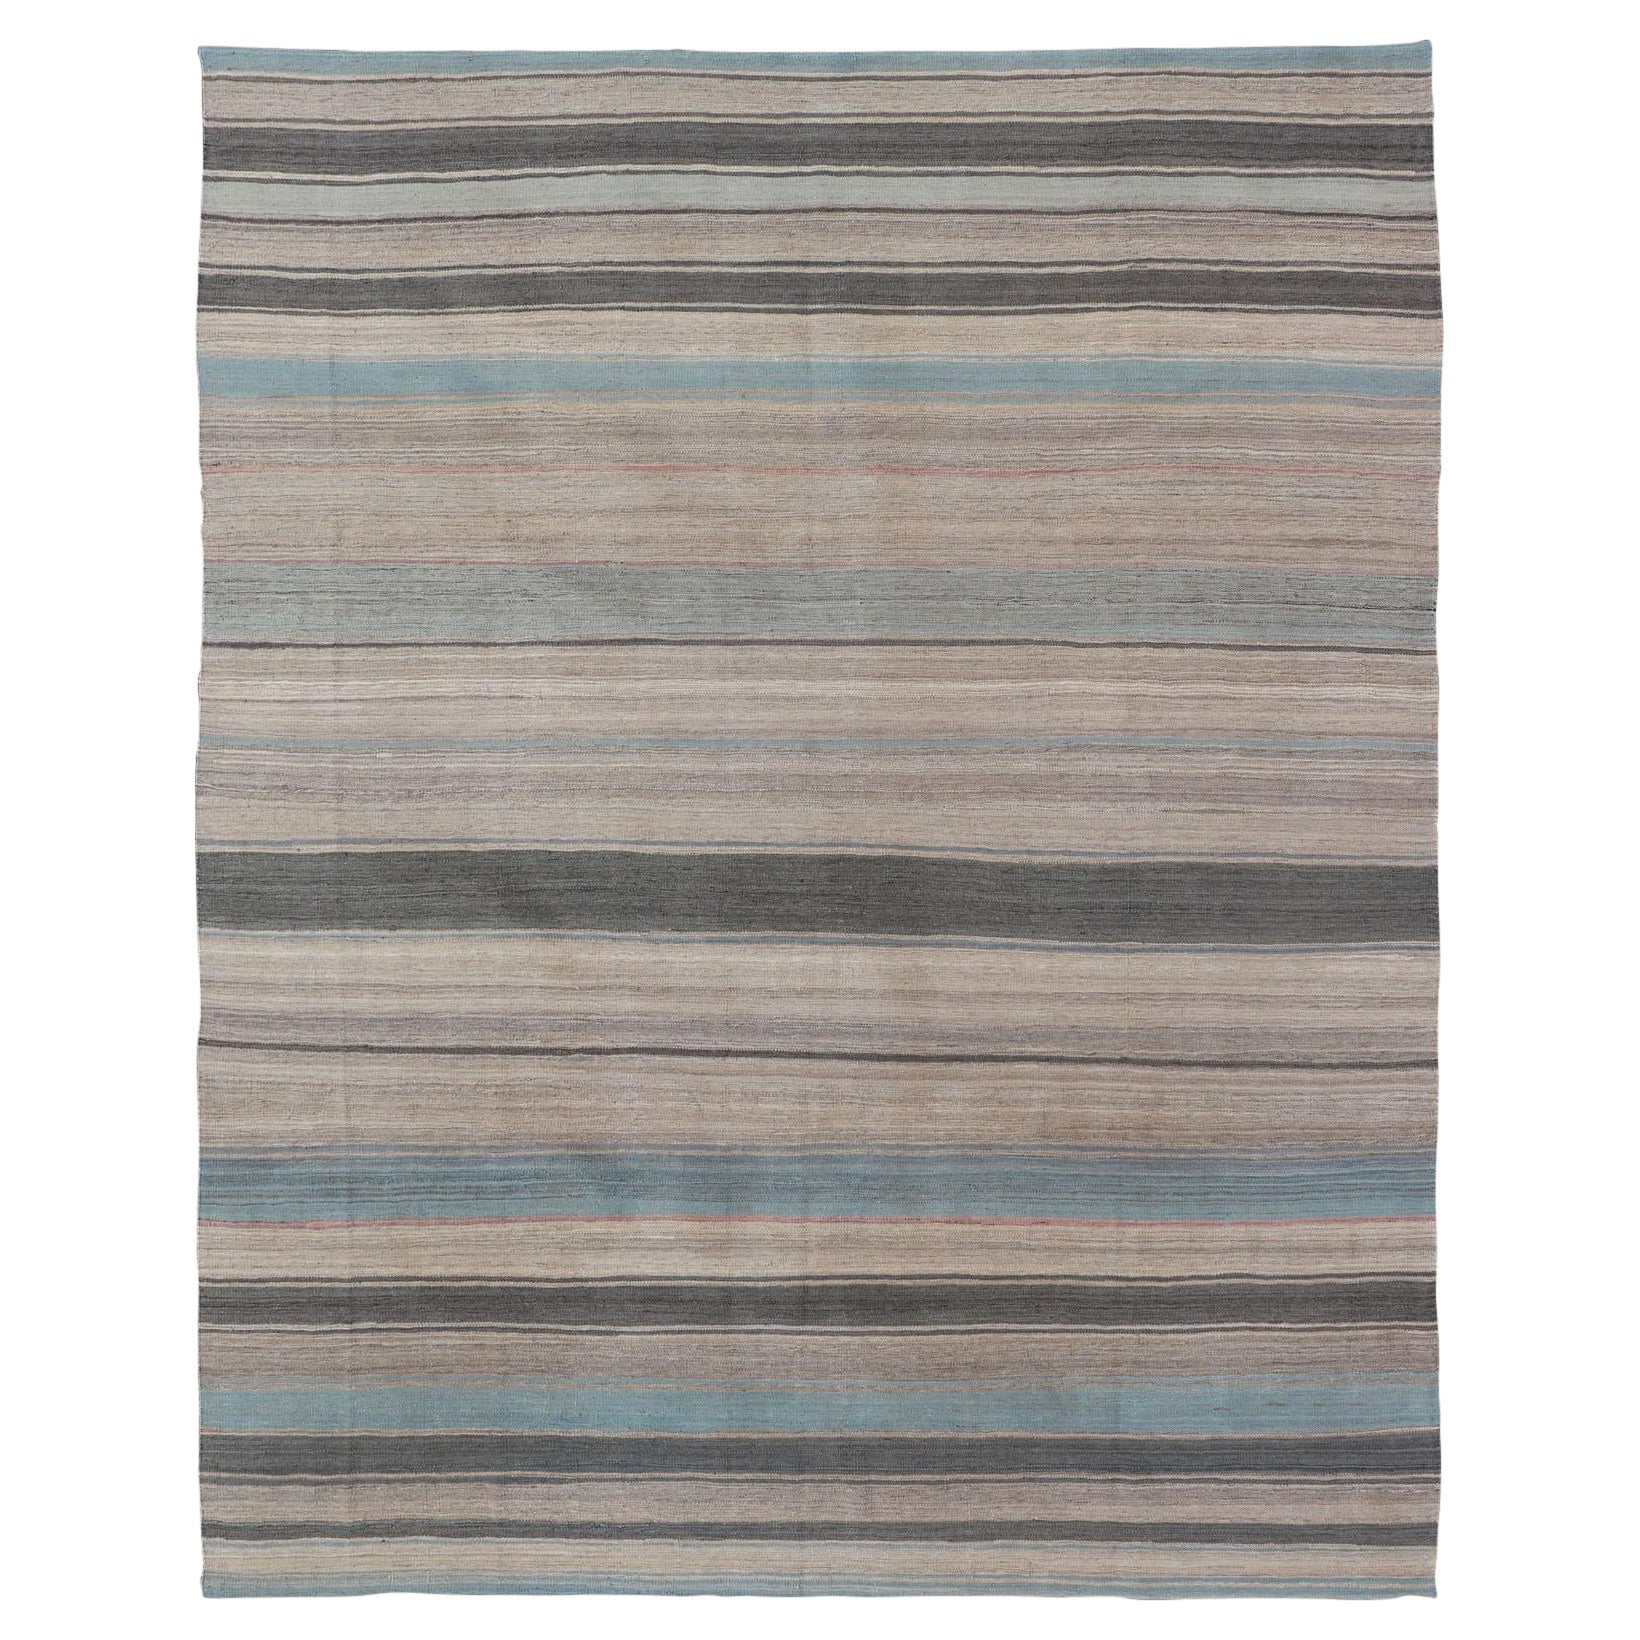 Modern Kilim Rug with Large Stripes in Shades of Blue, Taupe, Gray For Sale